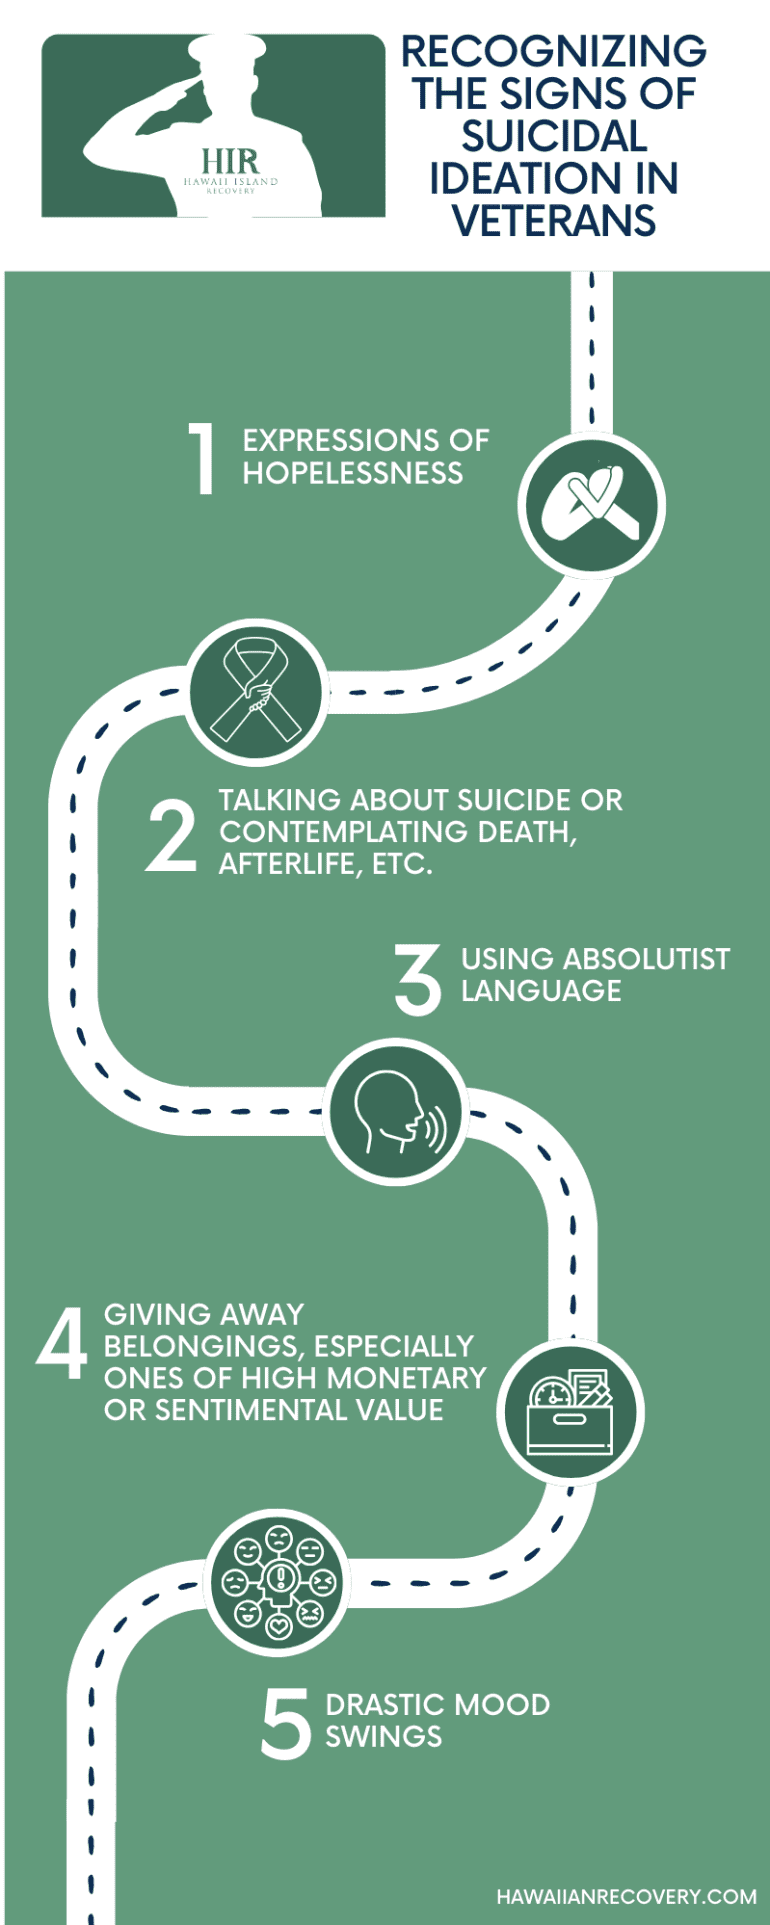 Recognizing the signs of suicidal ideation in veterans - infographic